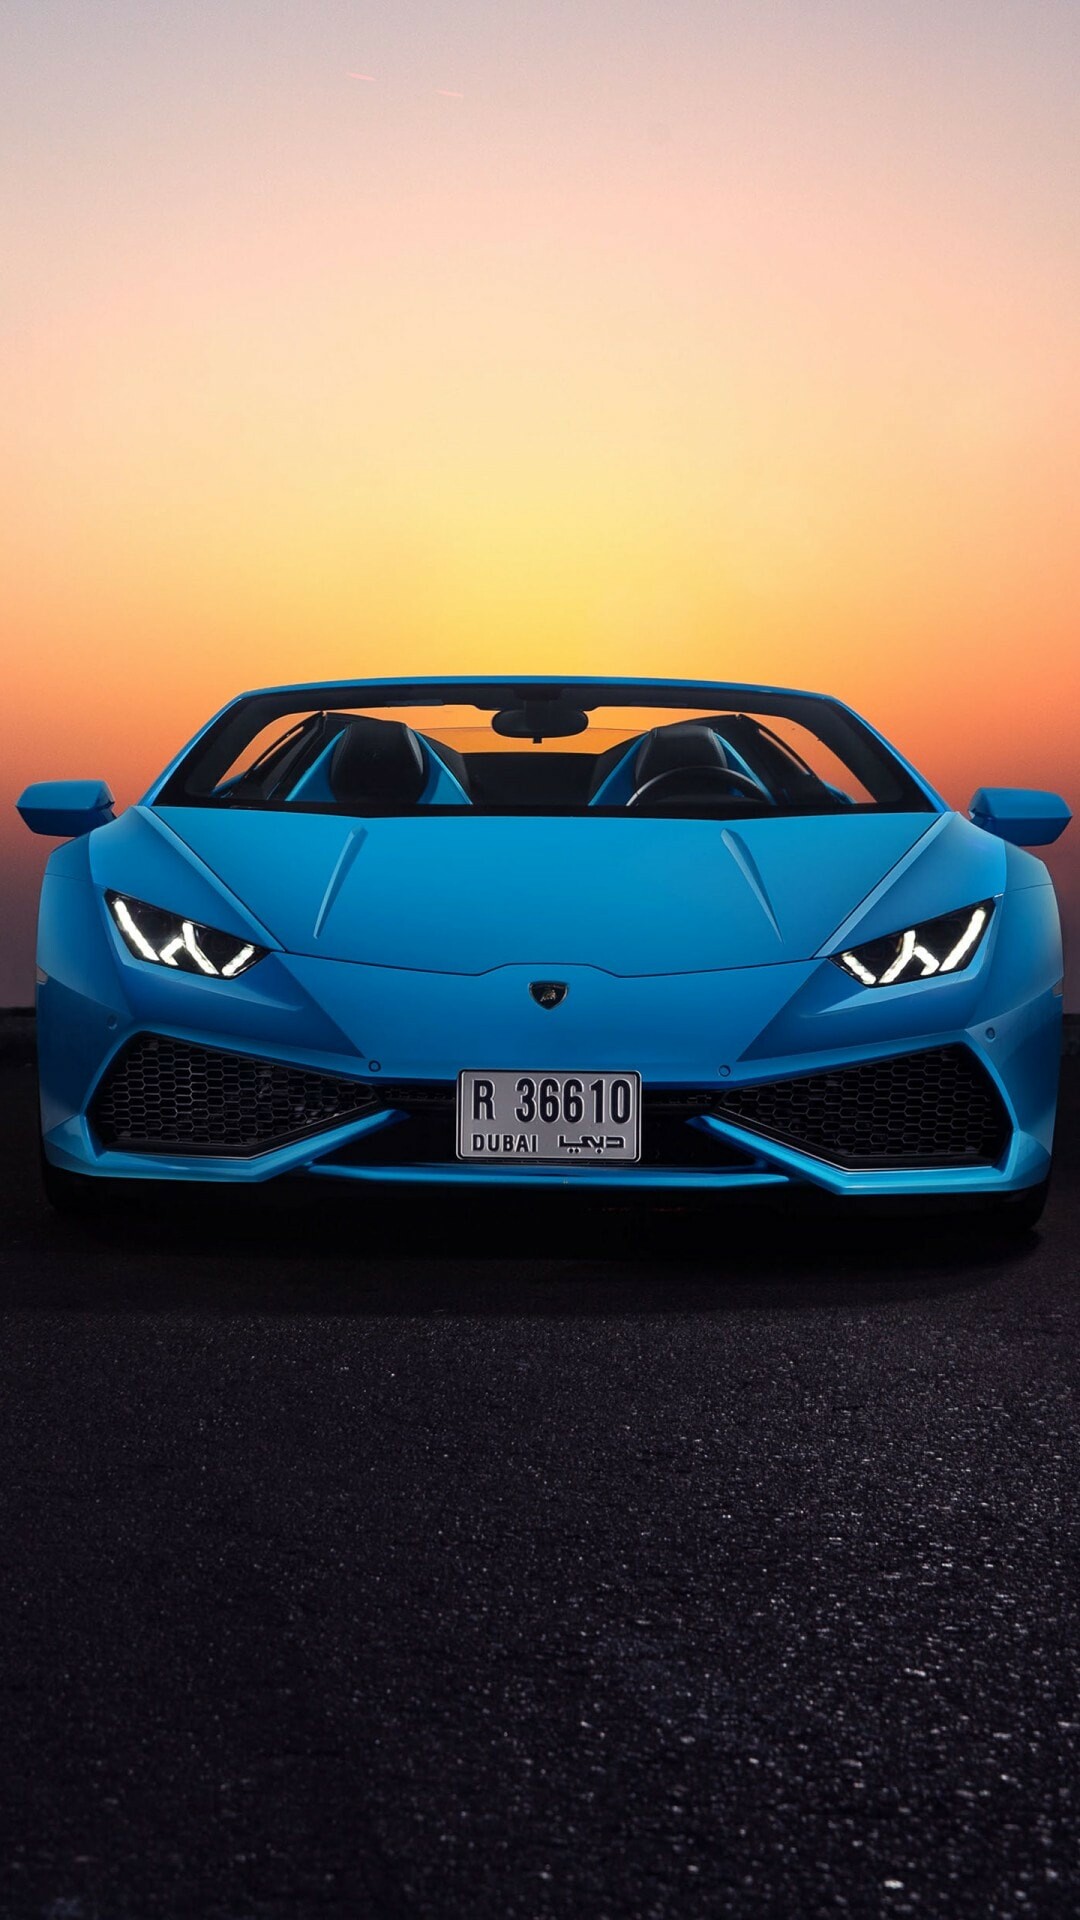 Lamborghini: Italian automotive brand, owned by the Volkswagen group. 1080x1920 Full HD Wallpaper.